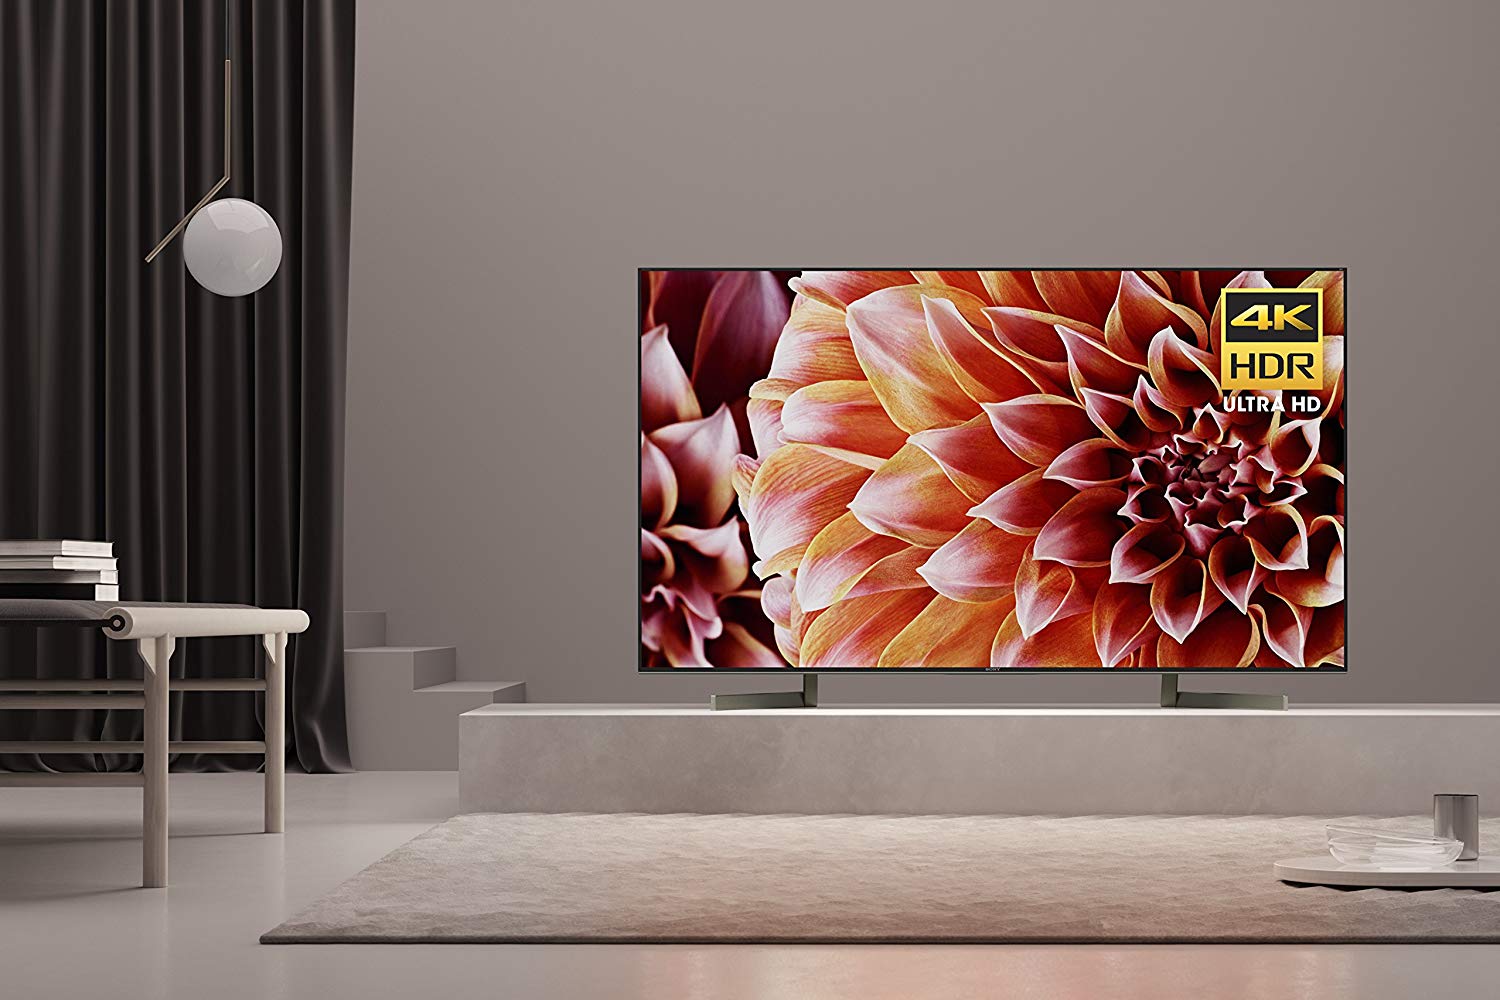 Sony 4K Ultra HD Smart TV, Sony 4K Ultra HD Smart TV Review